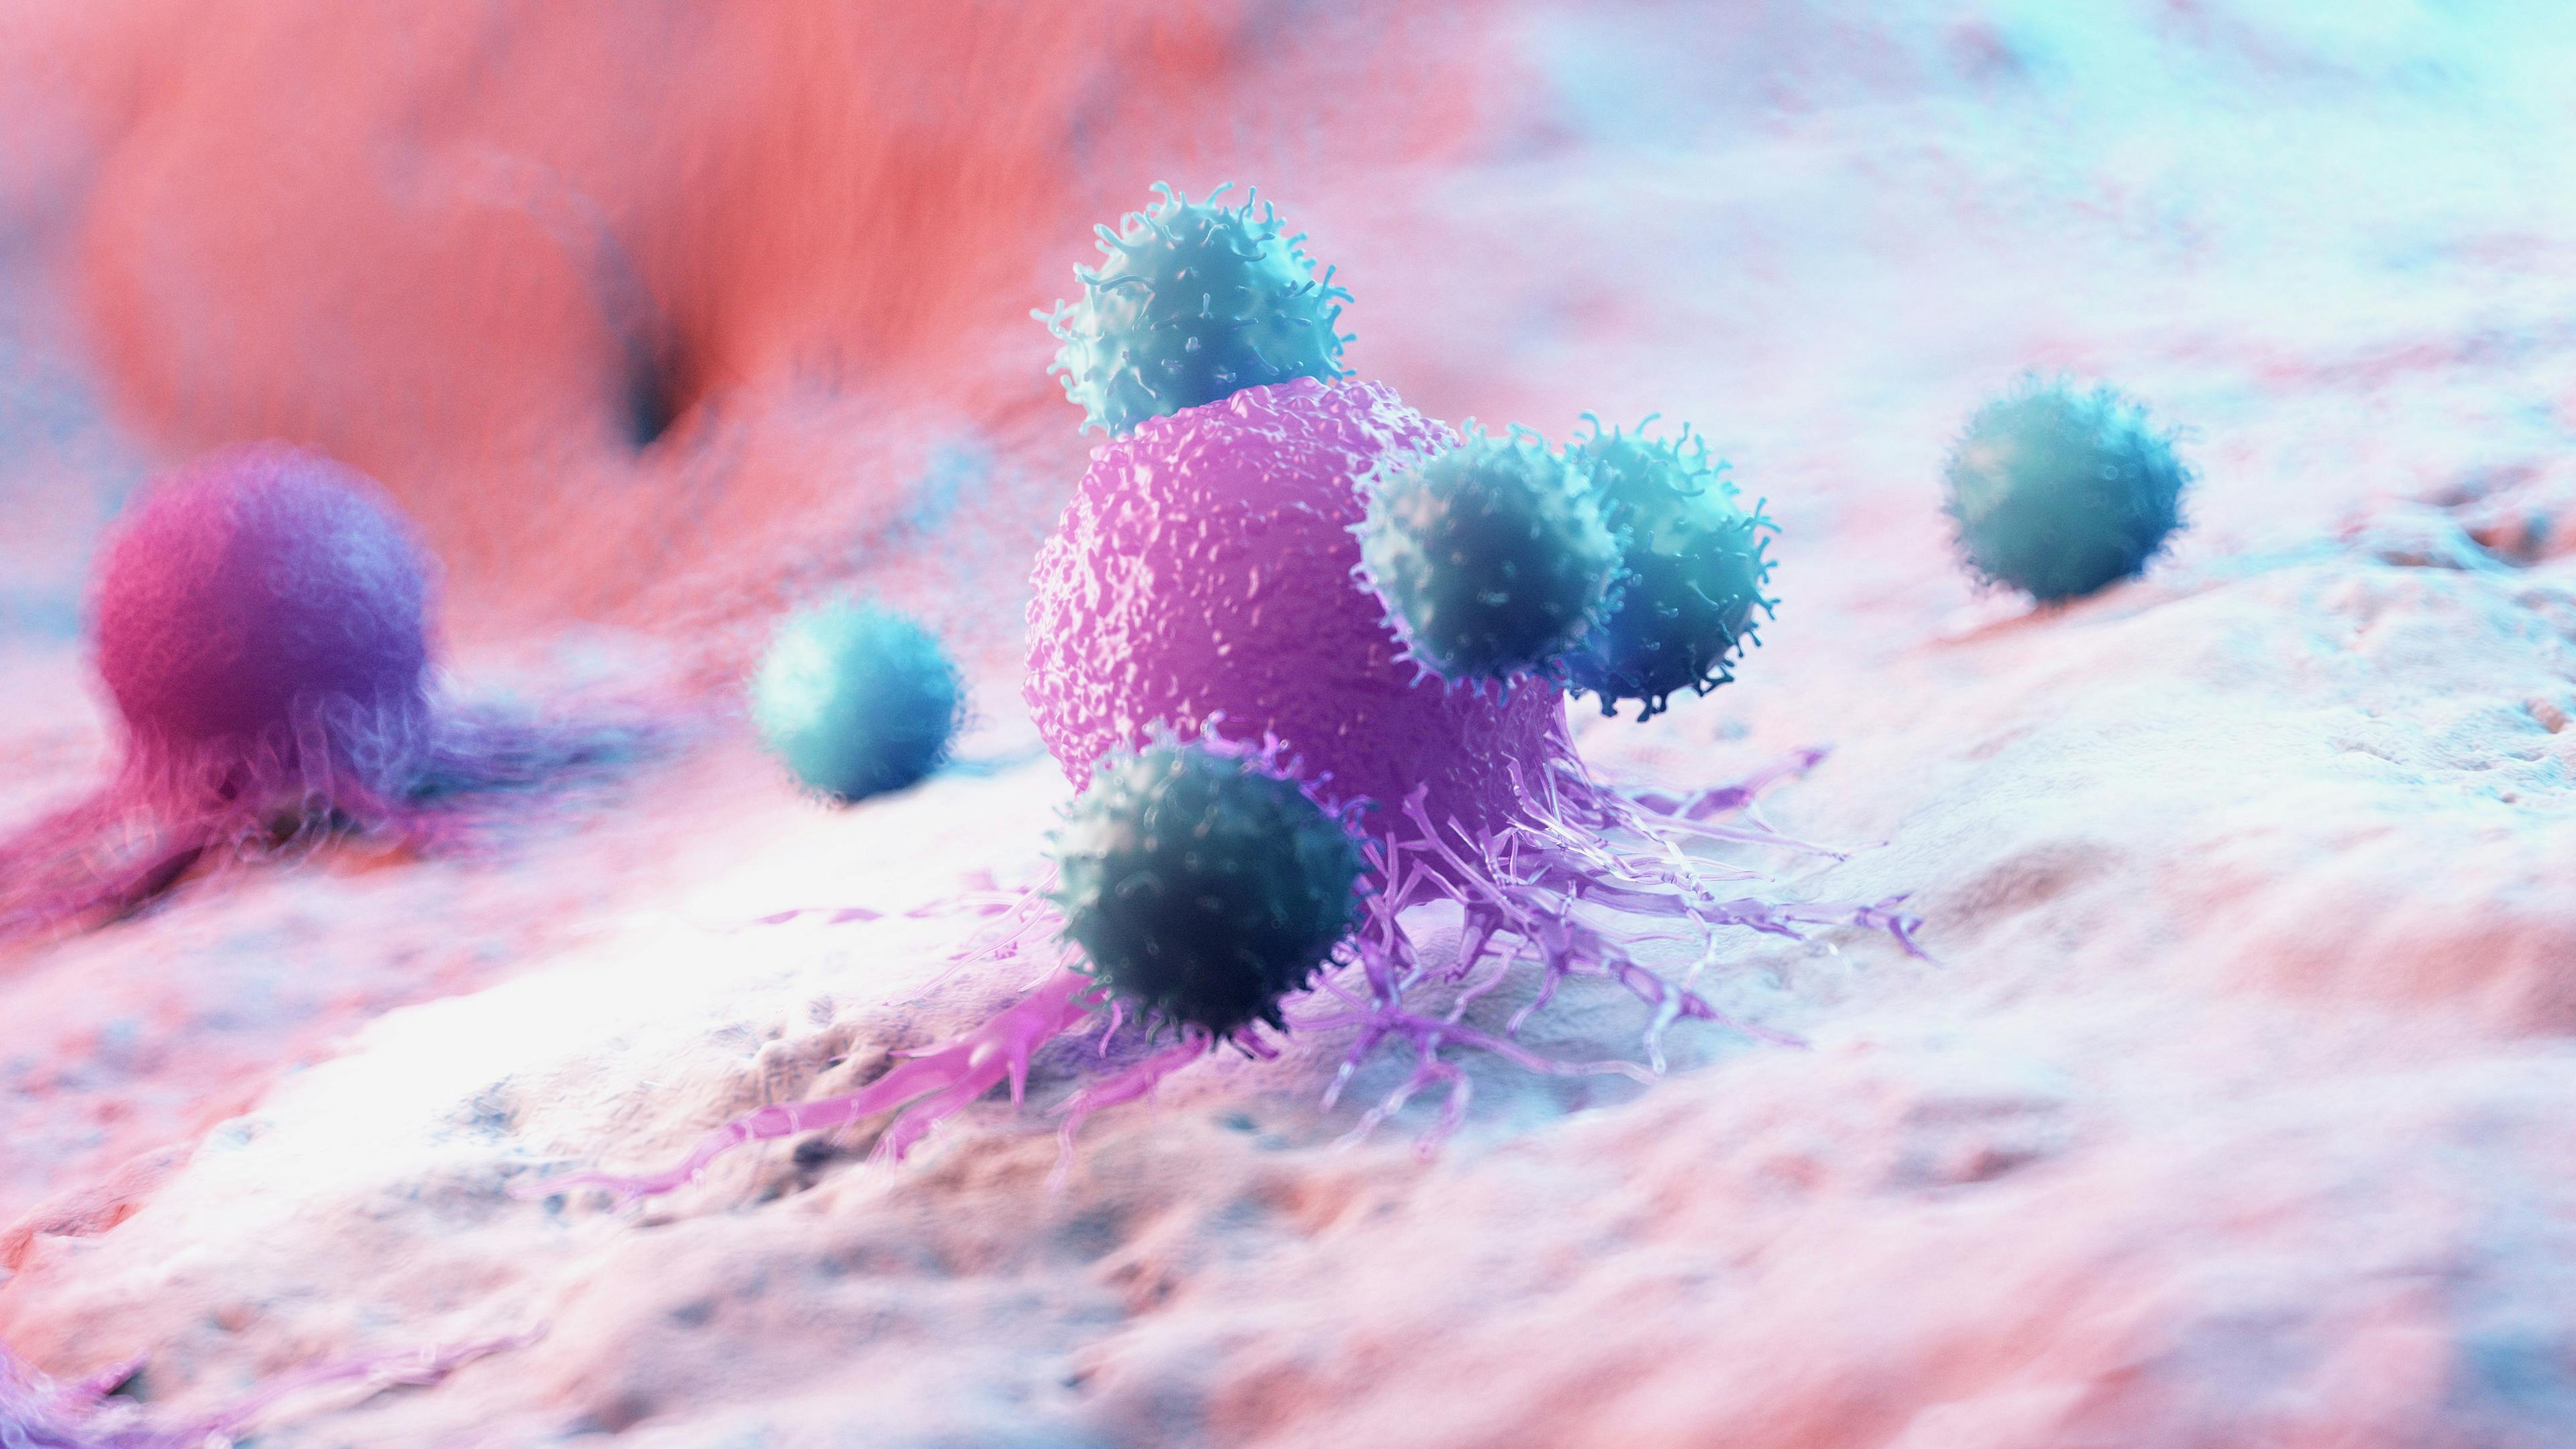 3d rendered medically accurate illustration of leukocytes attacking a cancer cell | Image Credit: SciePro - stock.adobe.com